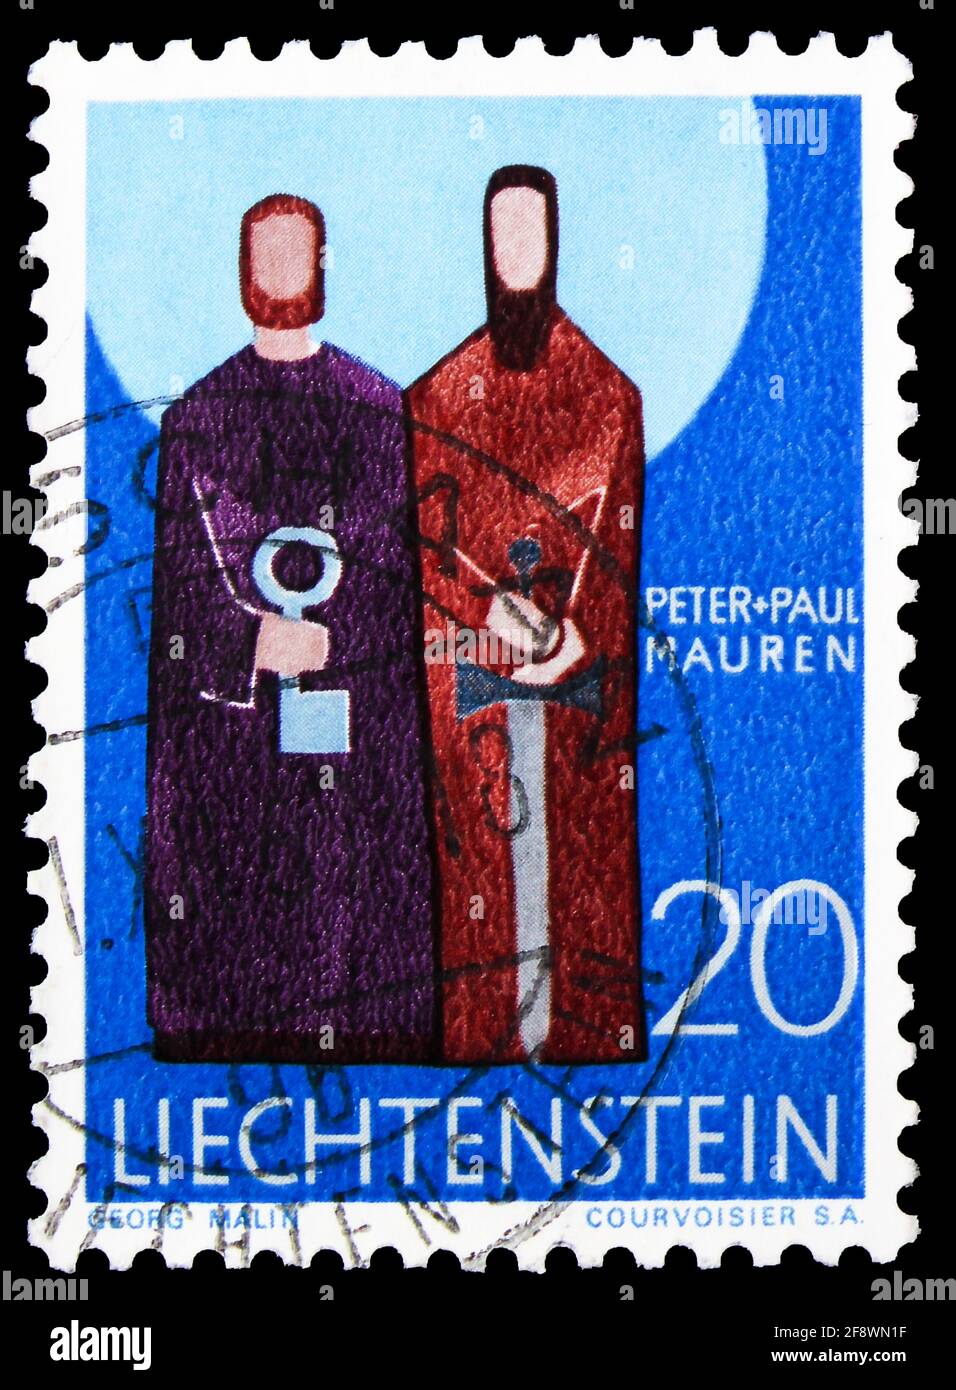 MOSCOW, RUSSIA - OCTOBER 1, 2019: Postage stamp printed in Liechtenstein shows Saints Peter and Paul, Patrons of the eleven municipalities of the Prin Stock Photo